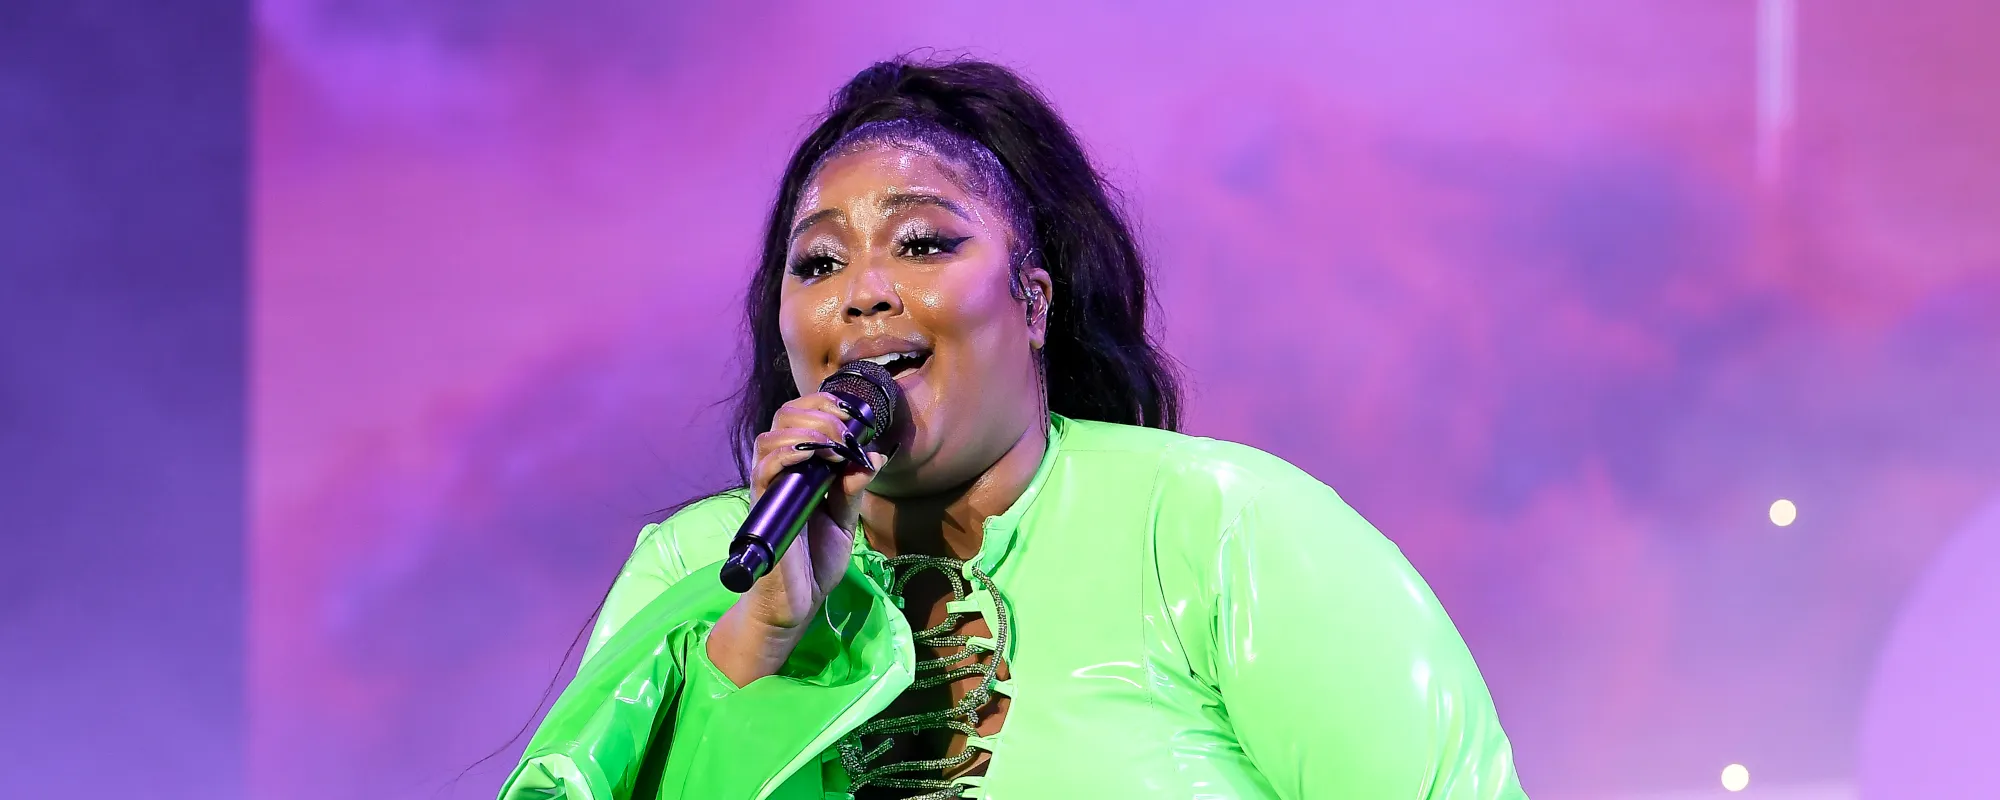 Lizzo is Changing Music in More Ways Than One: “Watch Out for the Big Grrrls”